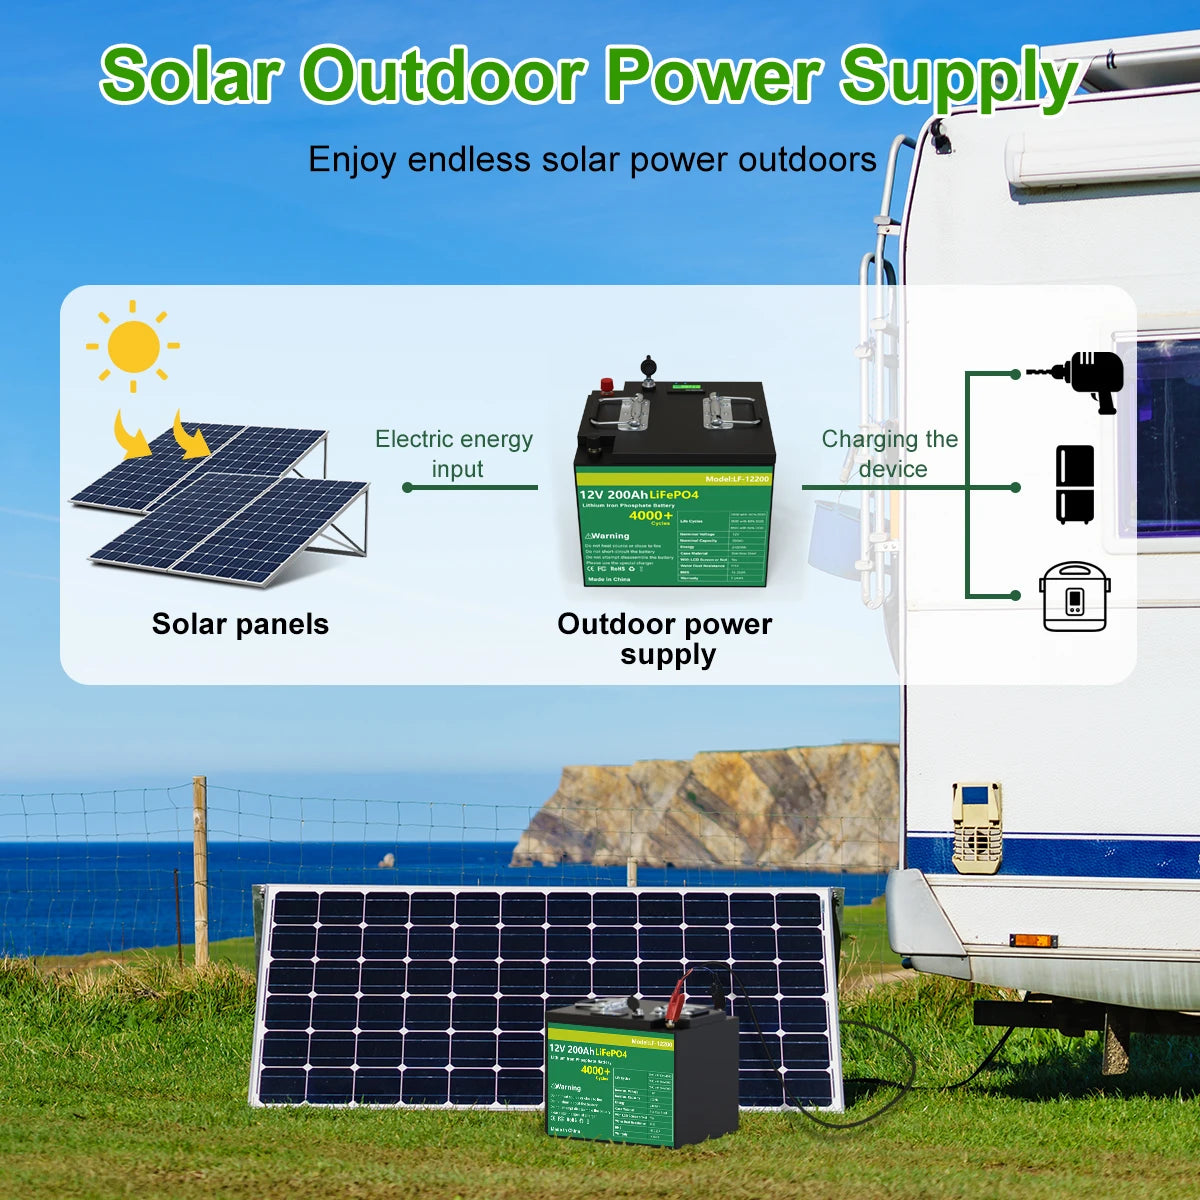 12V 200AH 202AH LiFePO4 Battery, Rechargeable solar power supply for RVs and outdoor use: 12V 200AH LiFePO4 battery with built-in management system.